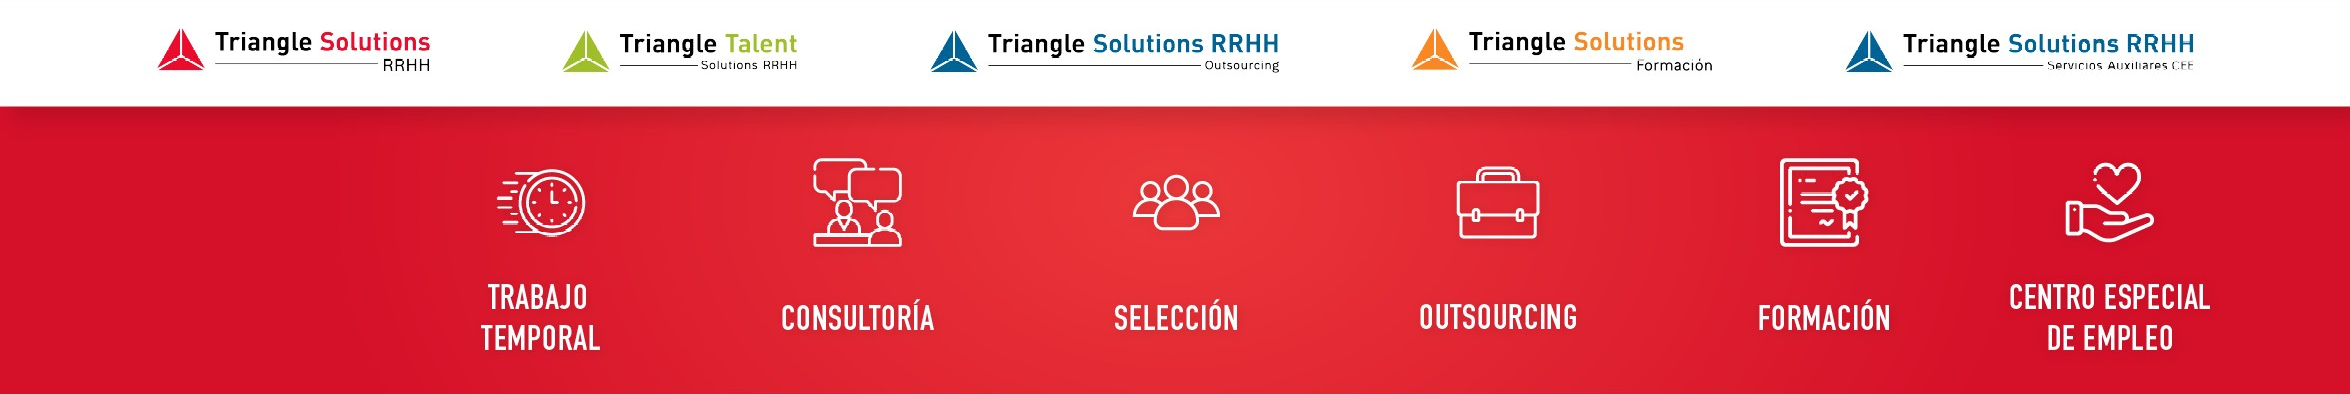 Triangle Solutions RRHH background